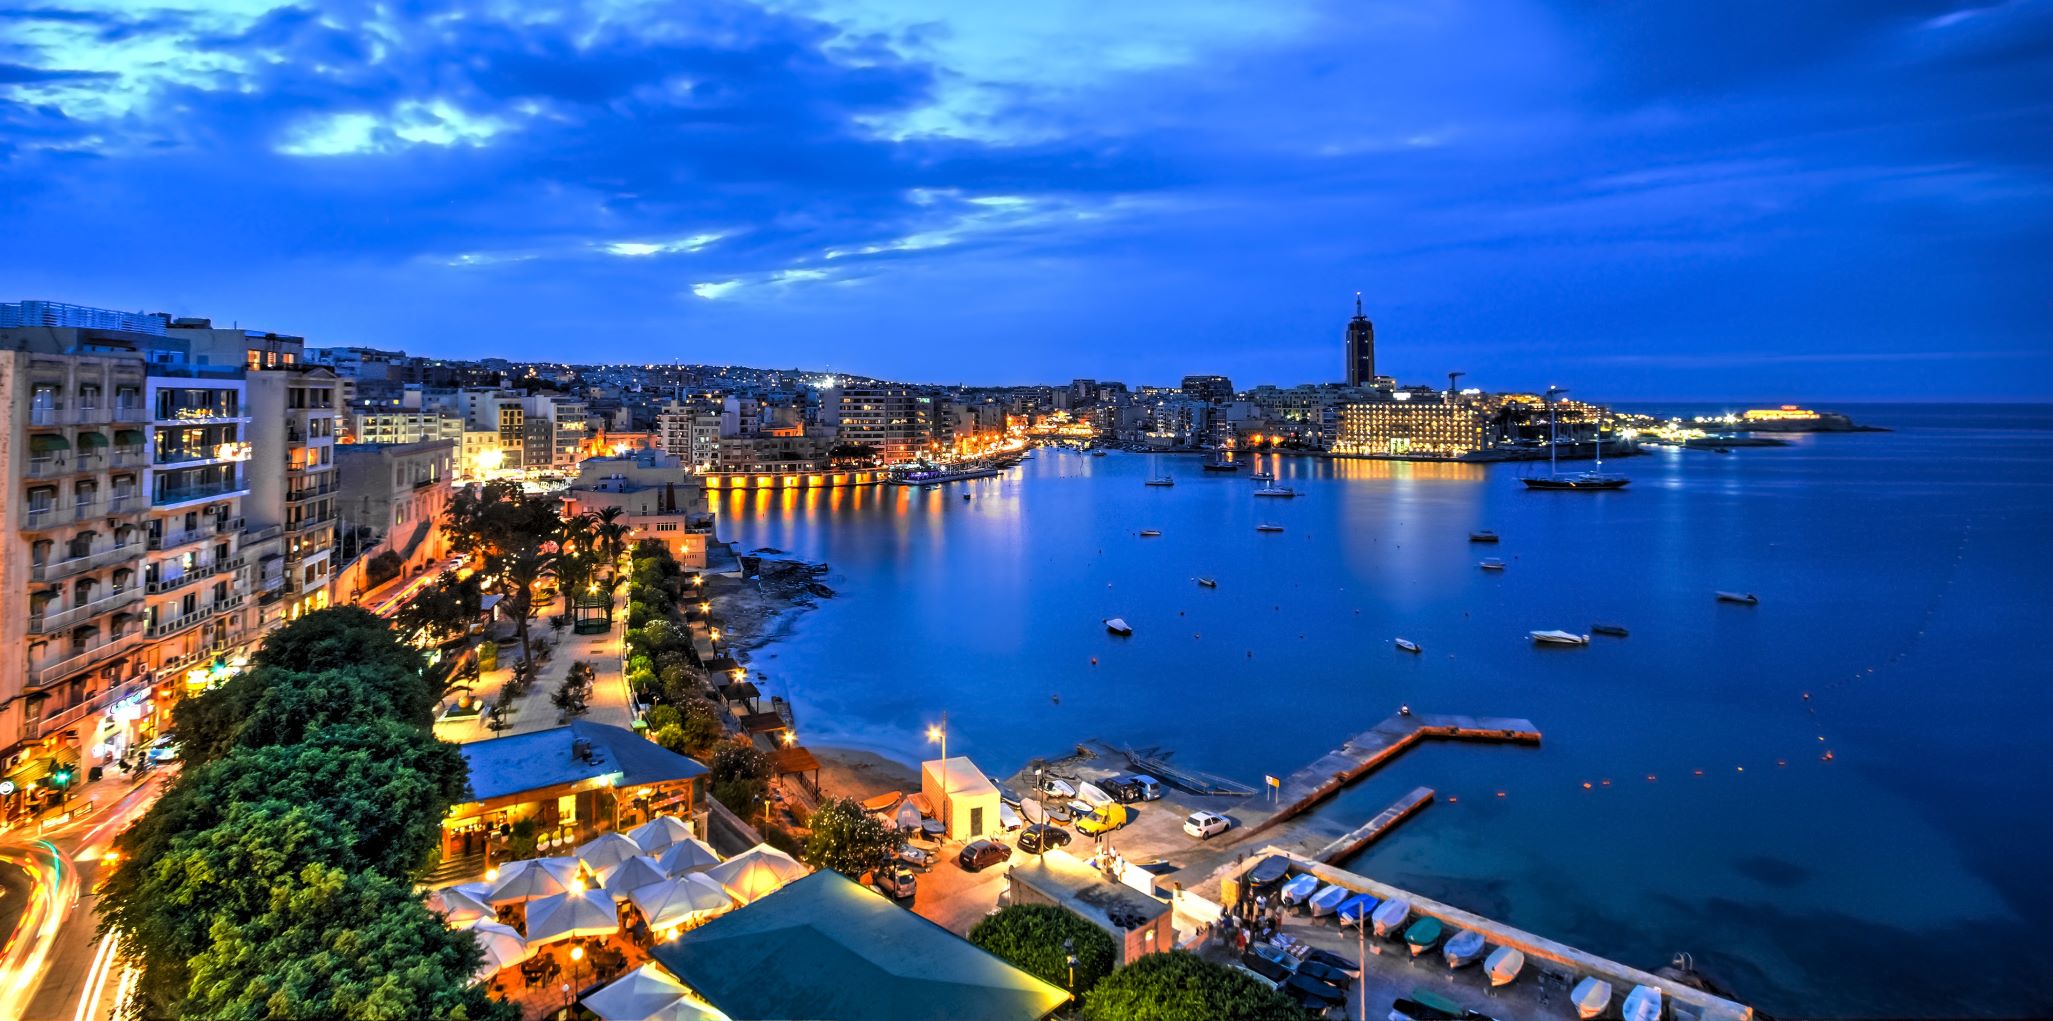 Why Trust Payments have expanded into Malta’s Gaming Sector